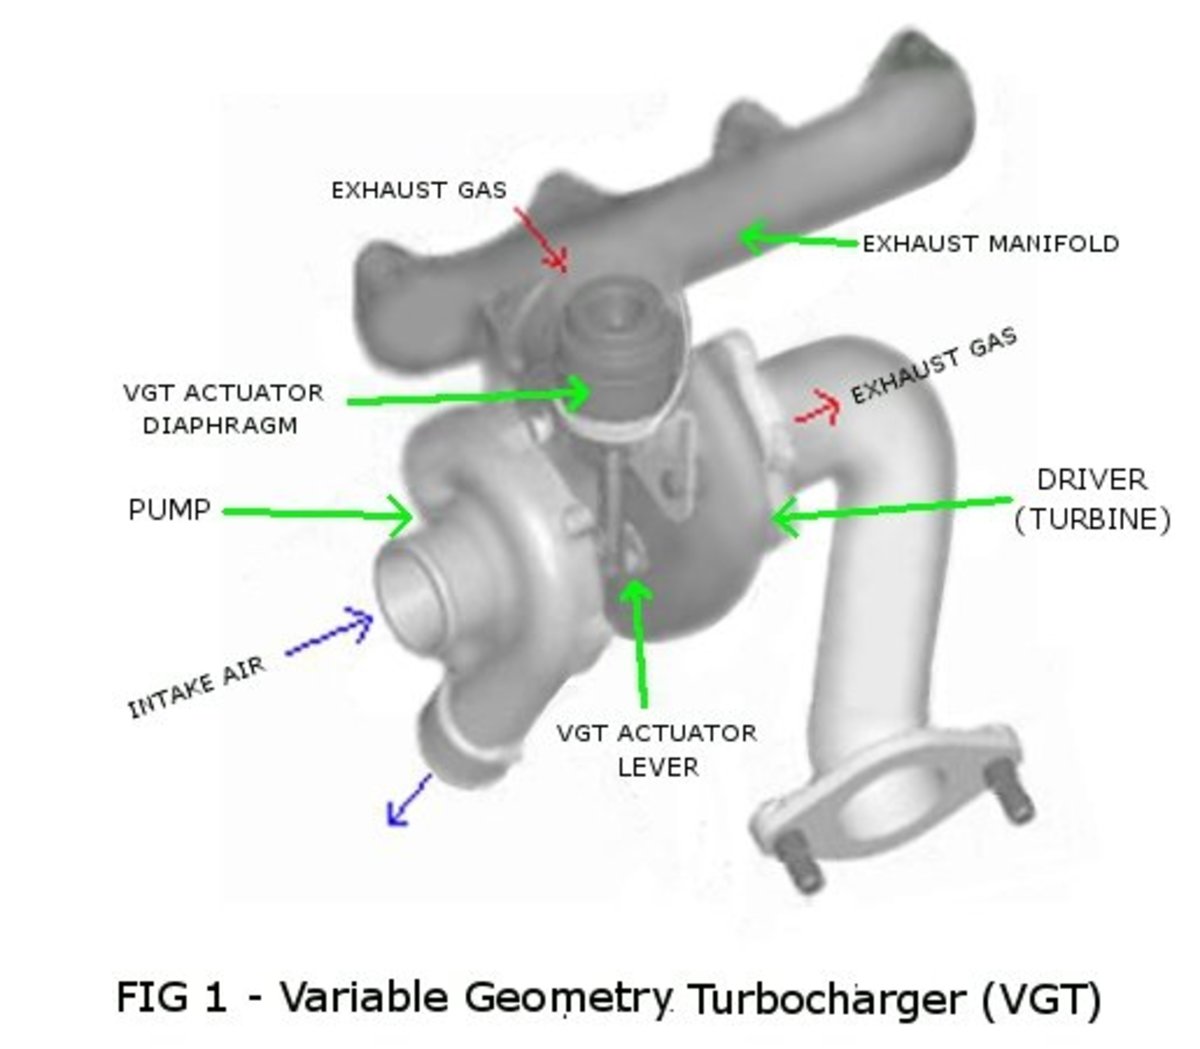 My car's turbocharged diesel engine lacked power. Why? Because of a stuck VGT mechanism. 